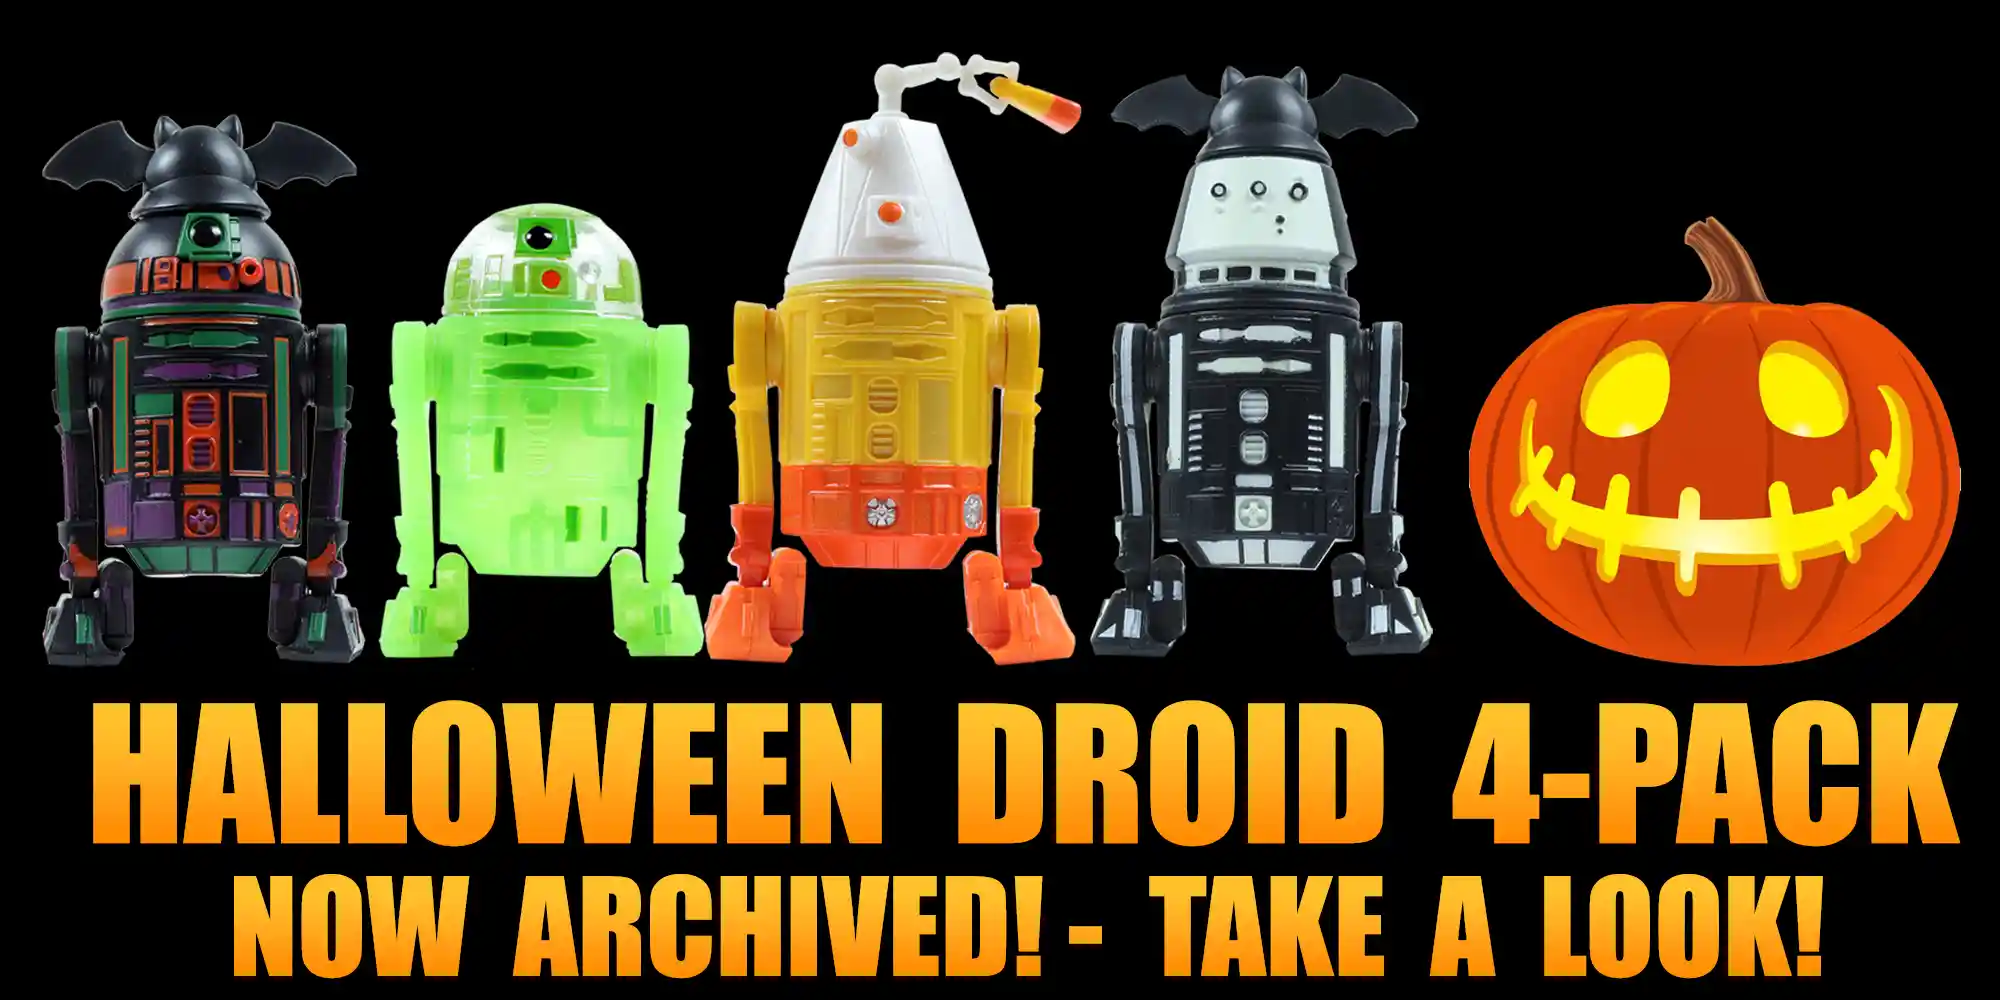 Disney Droid Factory Halloween Droid 4-Pack Archived - Take A Look!